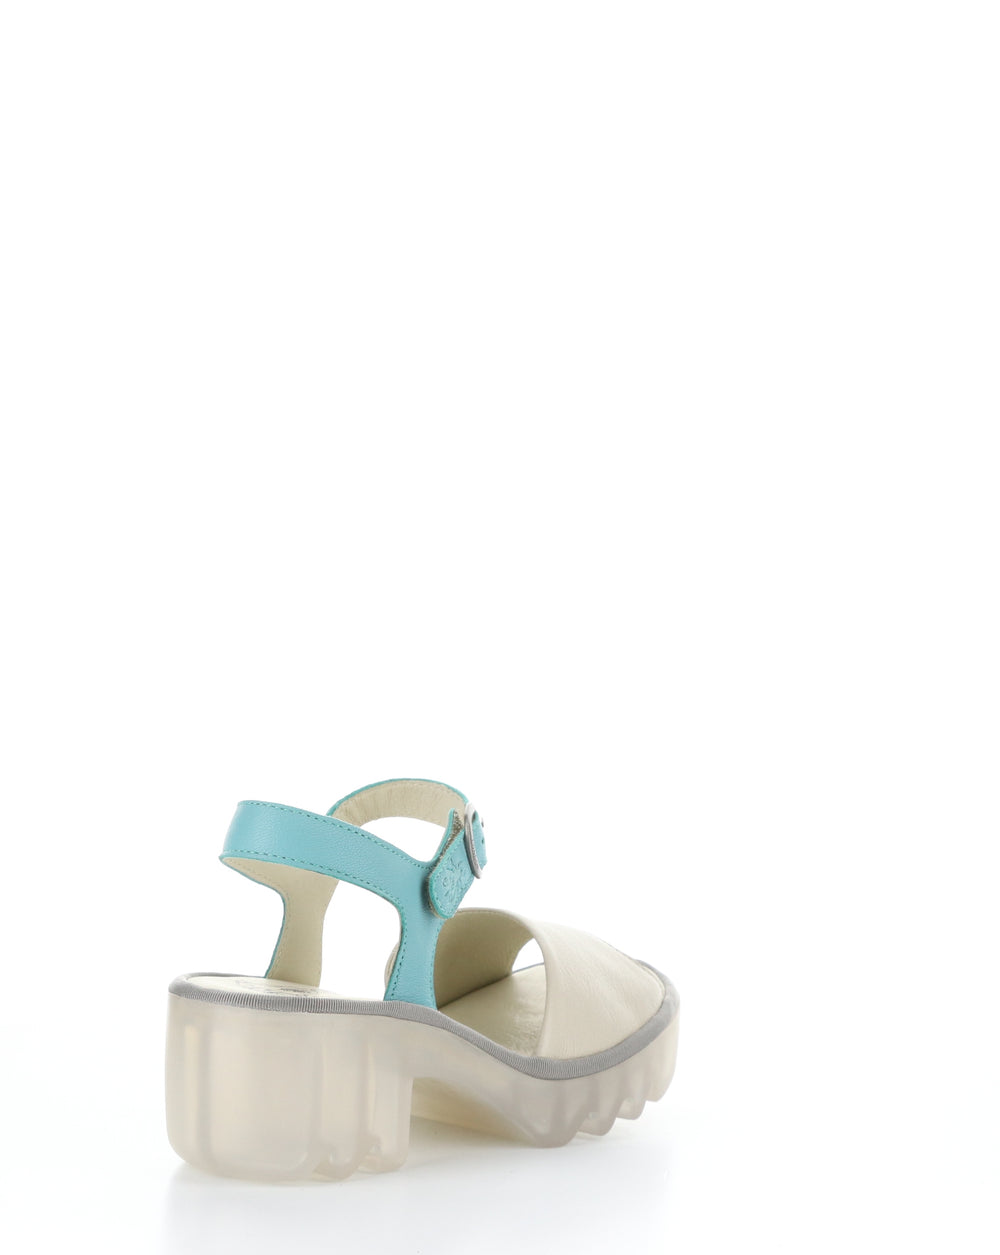 TULL503FLY 003 CLOUD/TURQUOISE Velcro Sandals